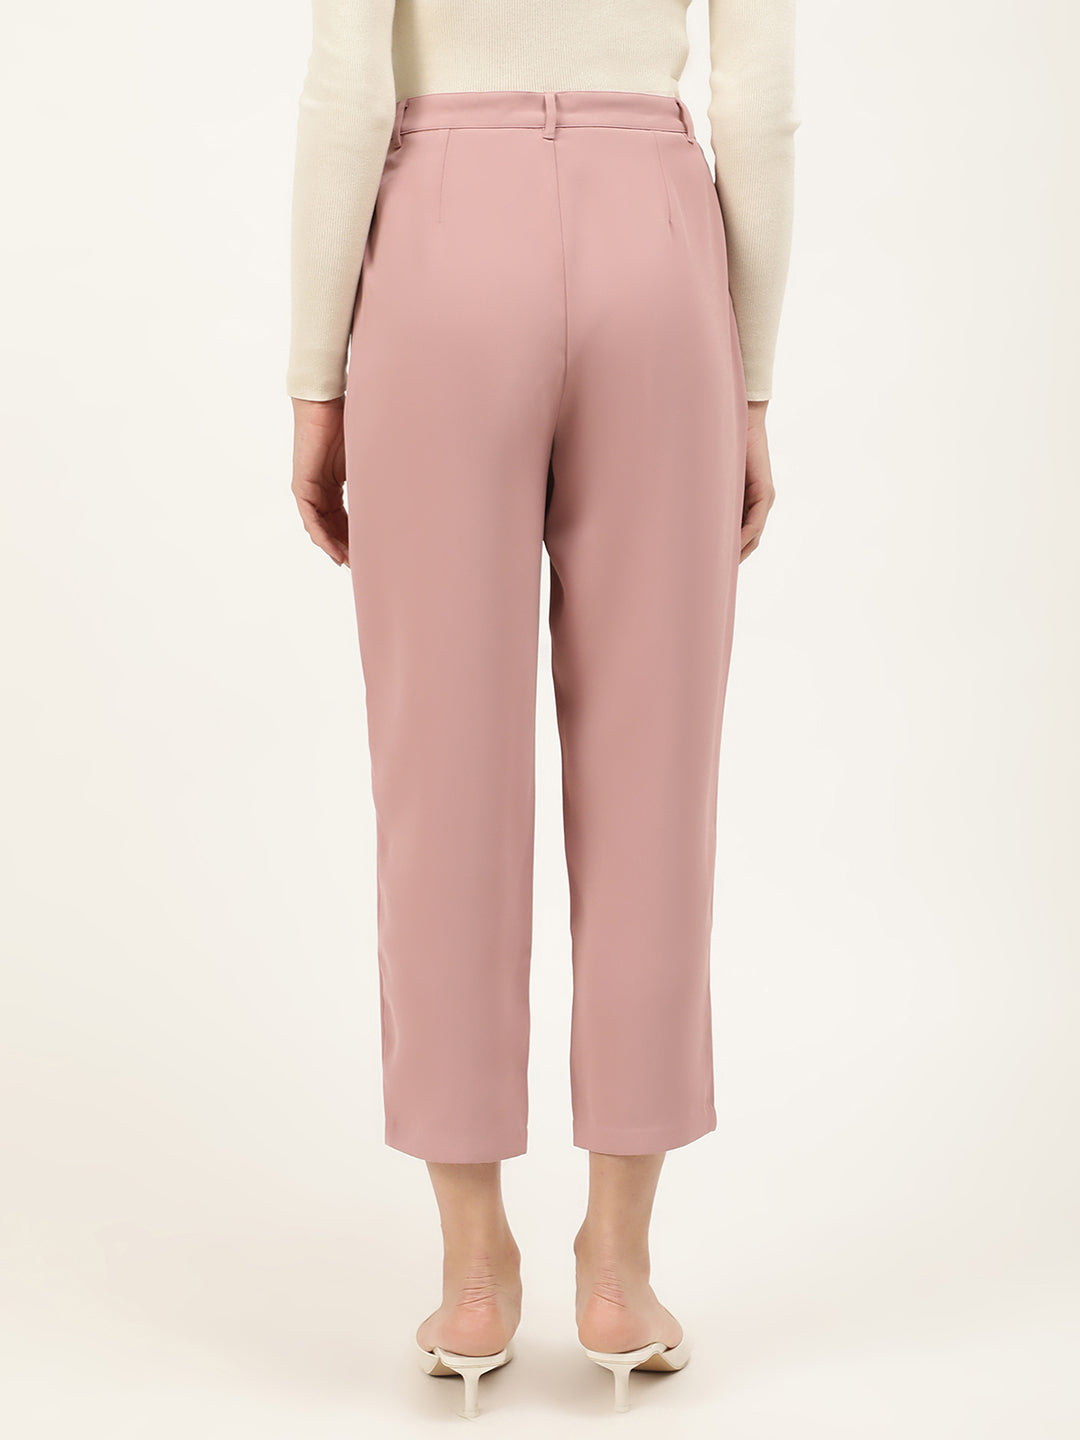 Centre Stage Women Pink Solid Regular Fit Trouser